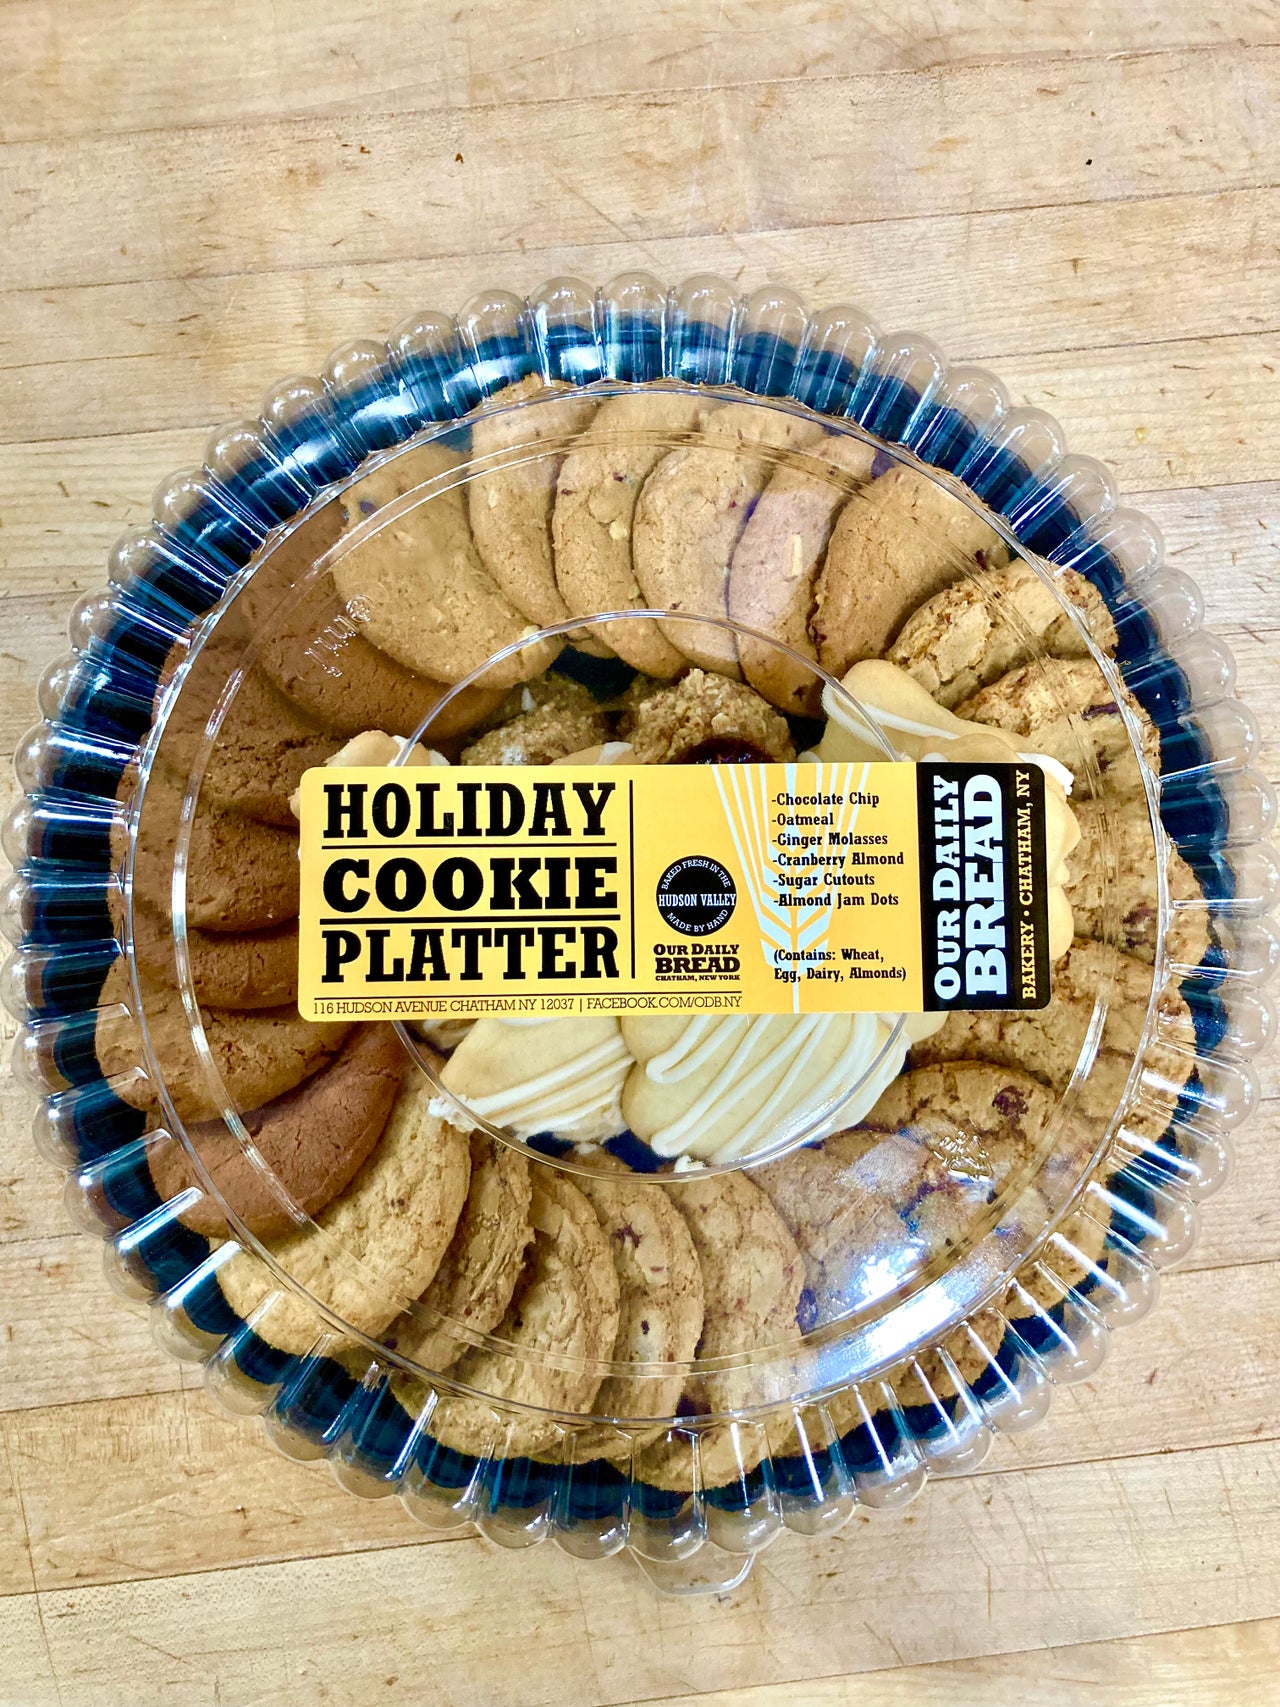 Holiday Cookie Platter Product Image